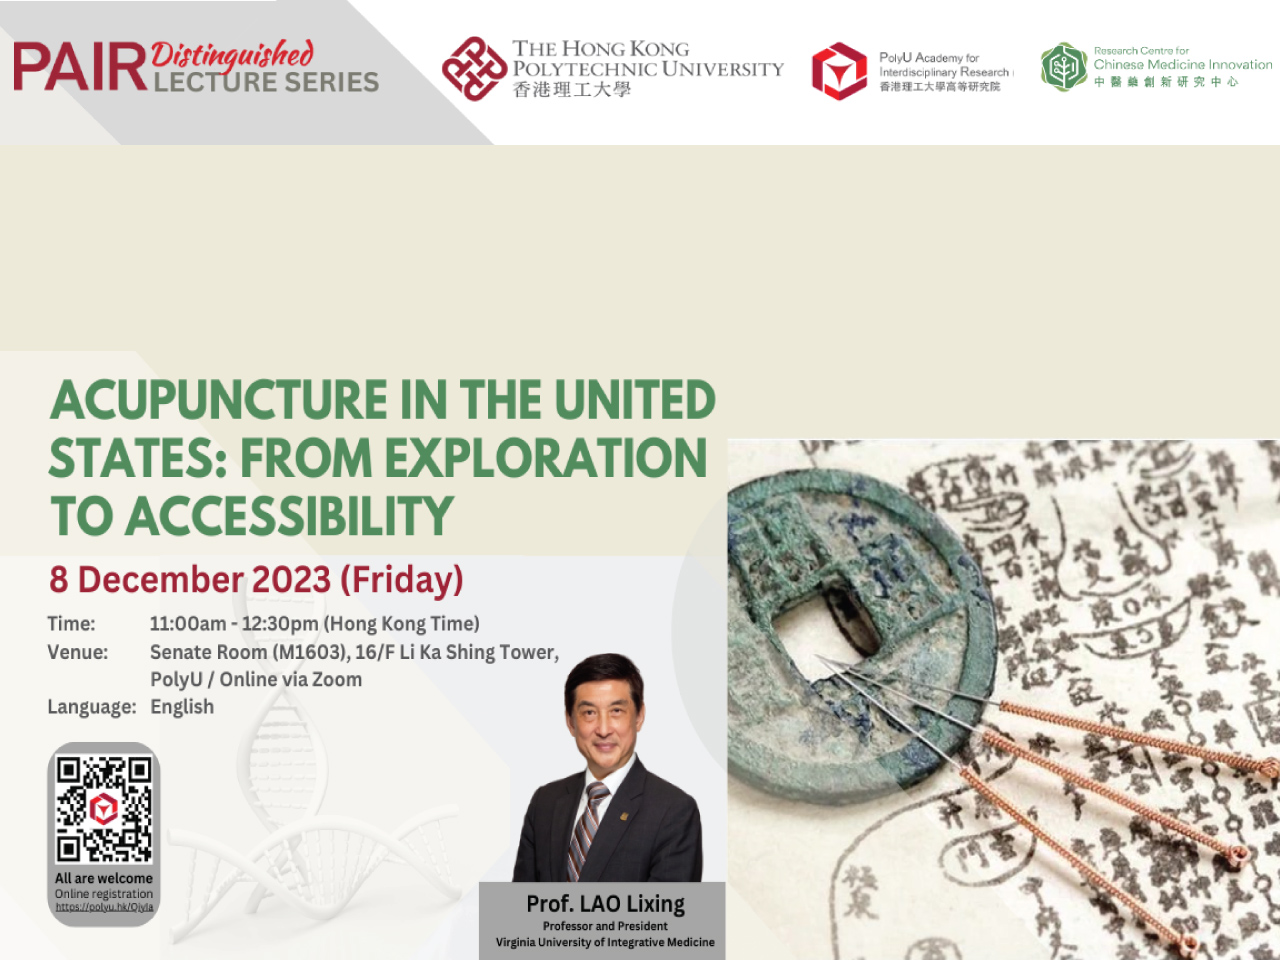 PAIR distinguished lecture series : acupuncture in the United States: from exploration to accessibility